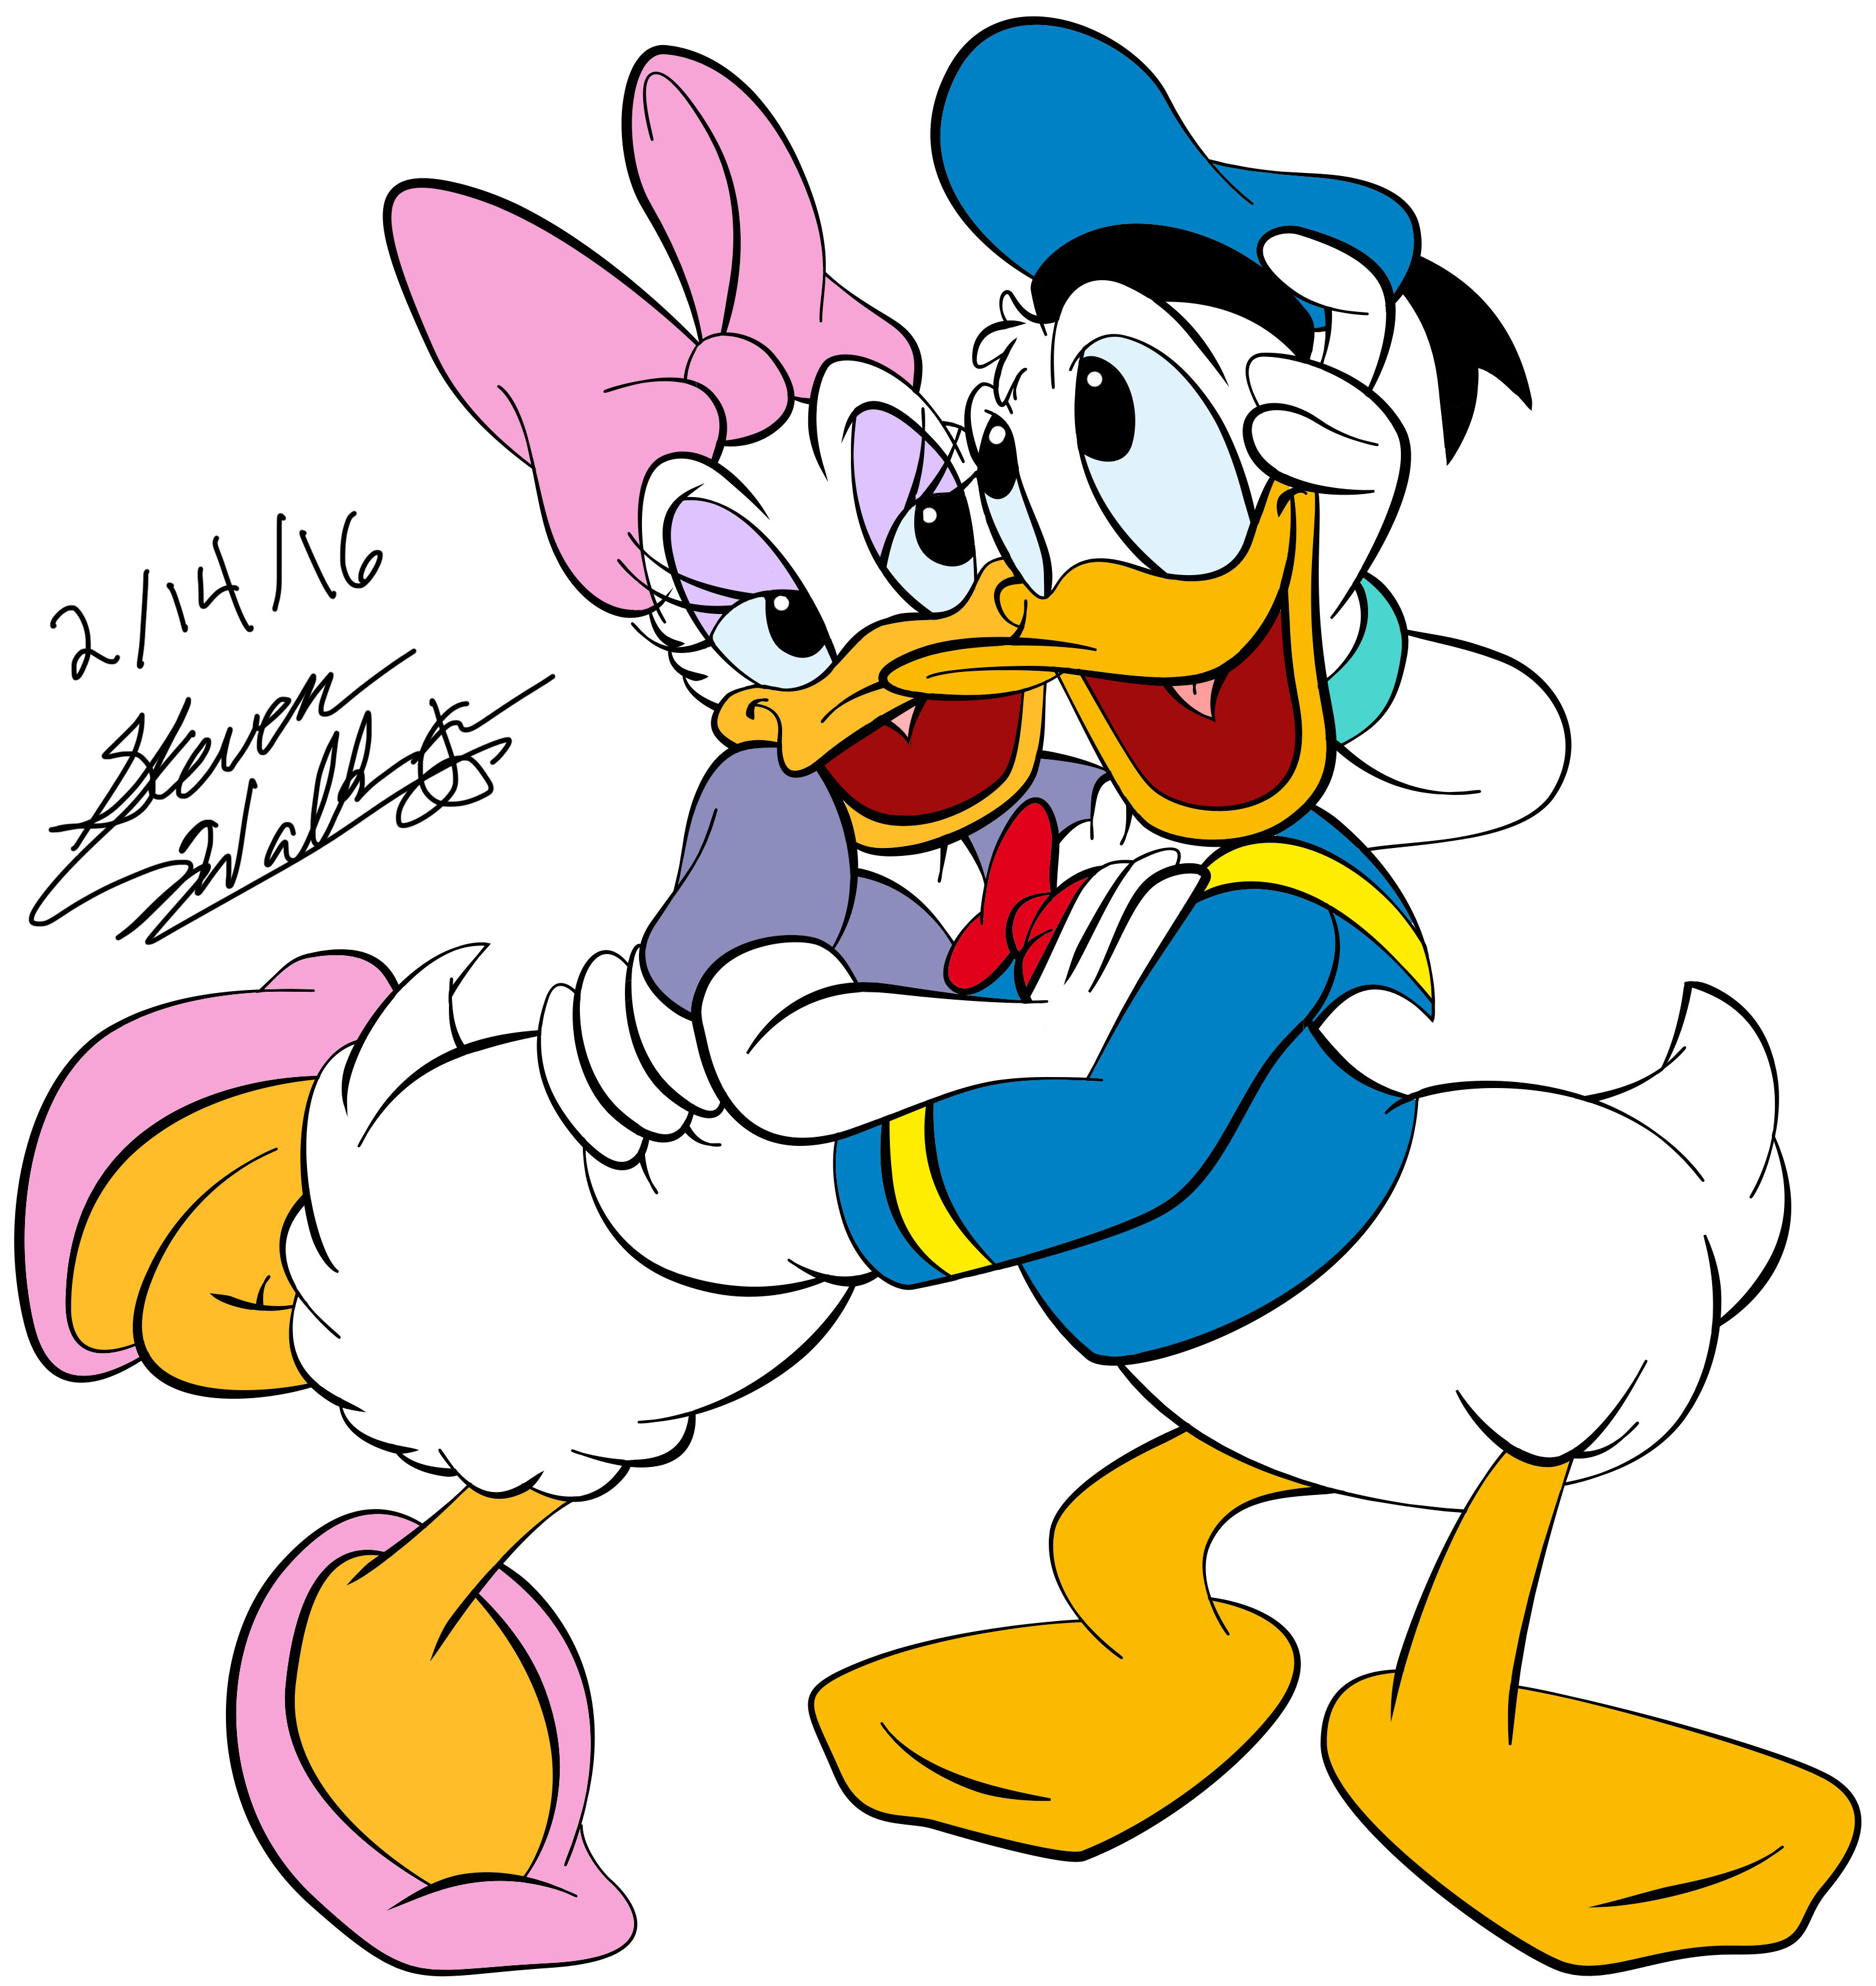 Digital Rendering of Donald and Daisy Duck by Steven Walker using Photoshop...